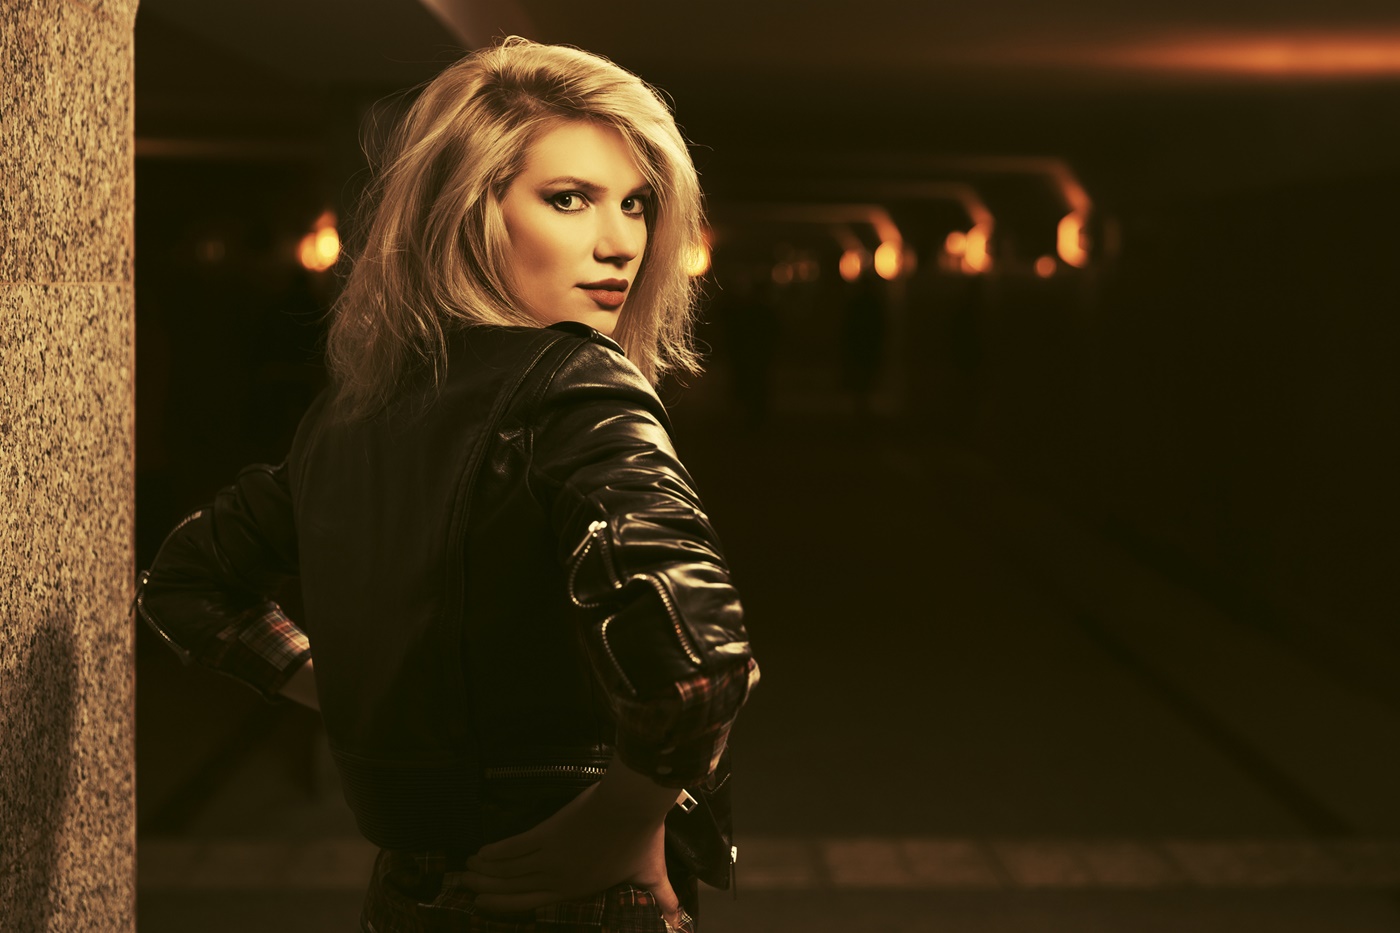 Hot Blonde in Leather Jacket